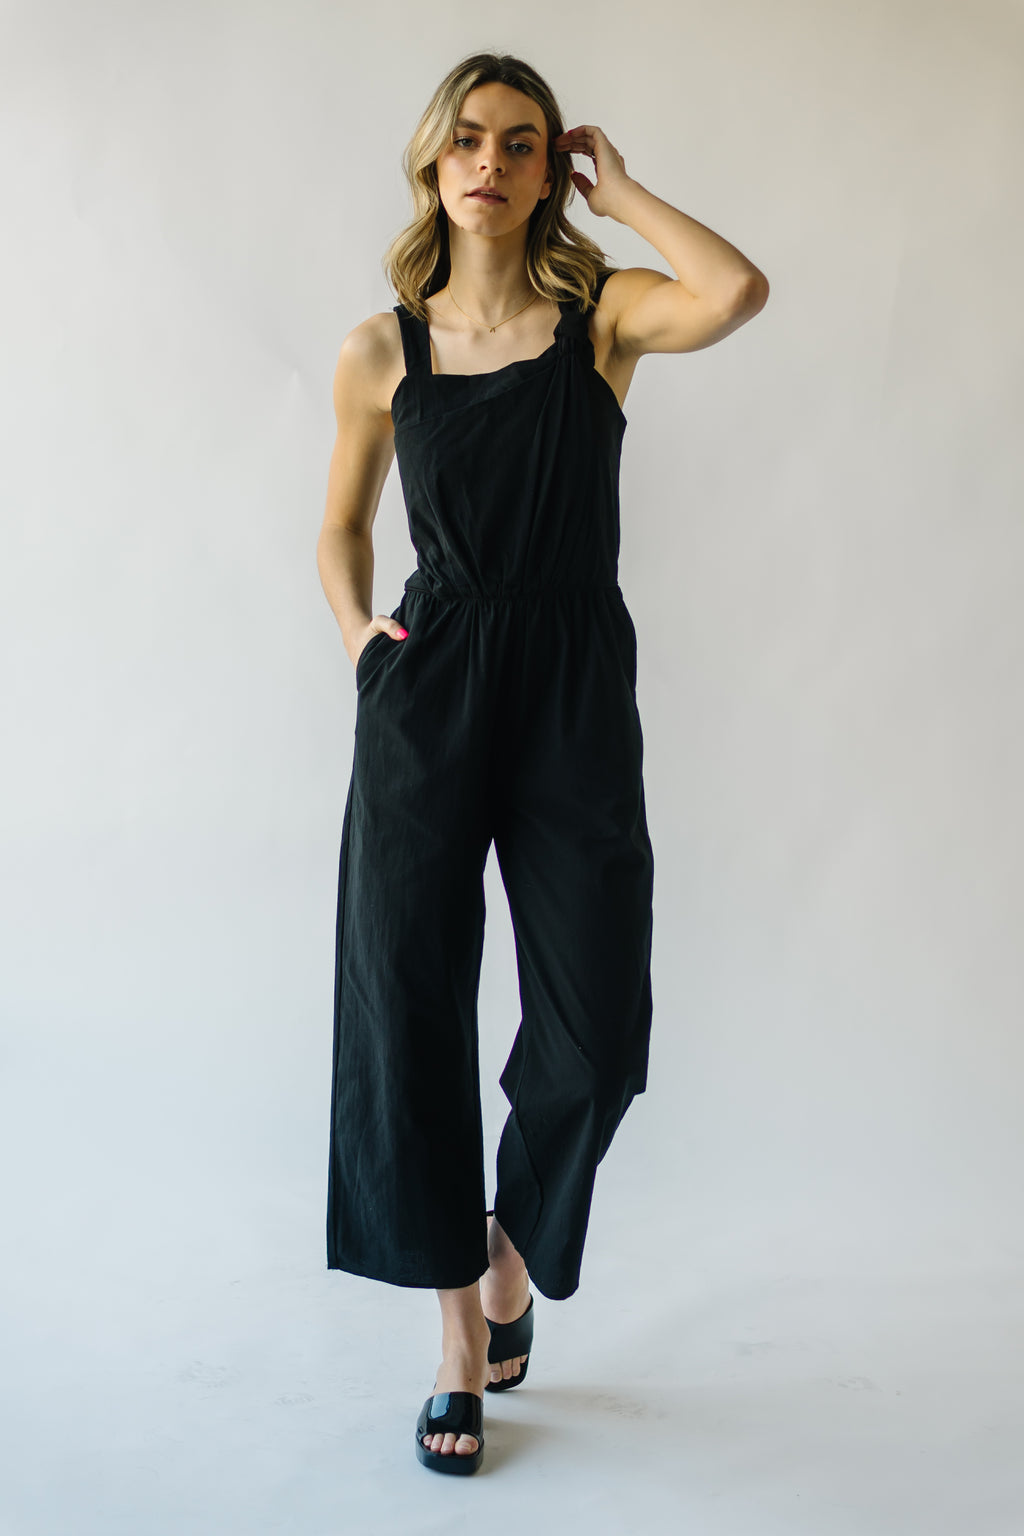 Piper & Scoot Shop | Trendy Womens Clothing Brand